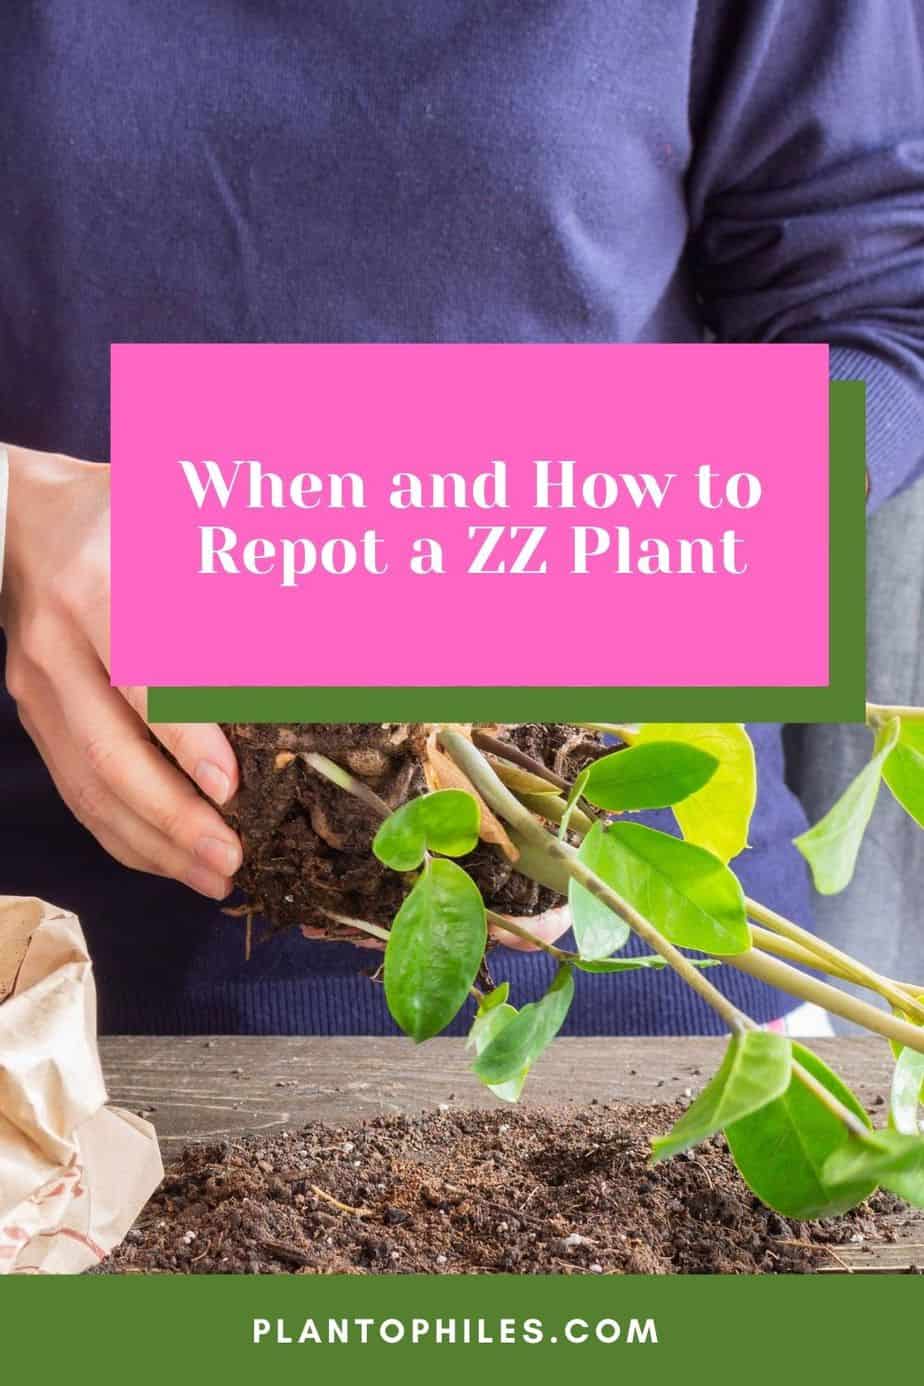 When and How to Repot a ZZ Plant